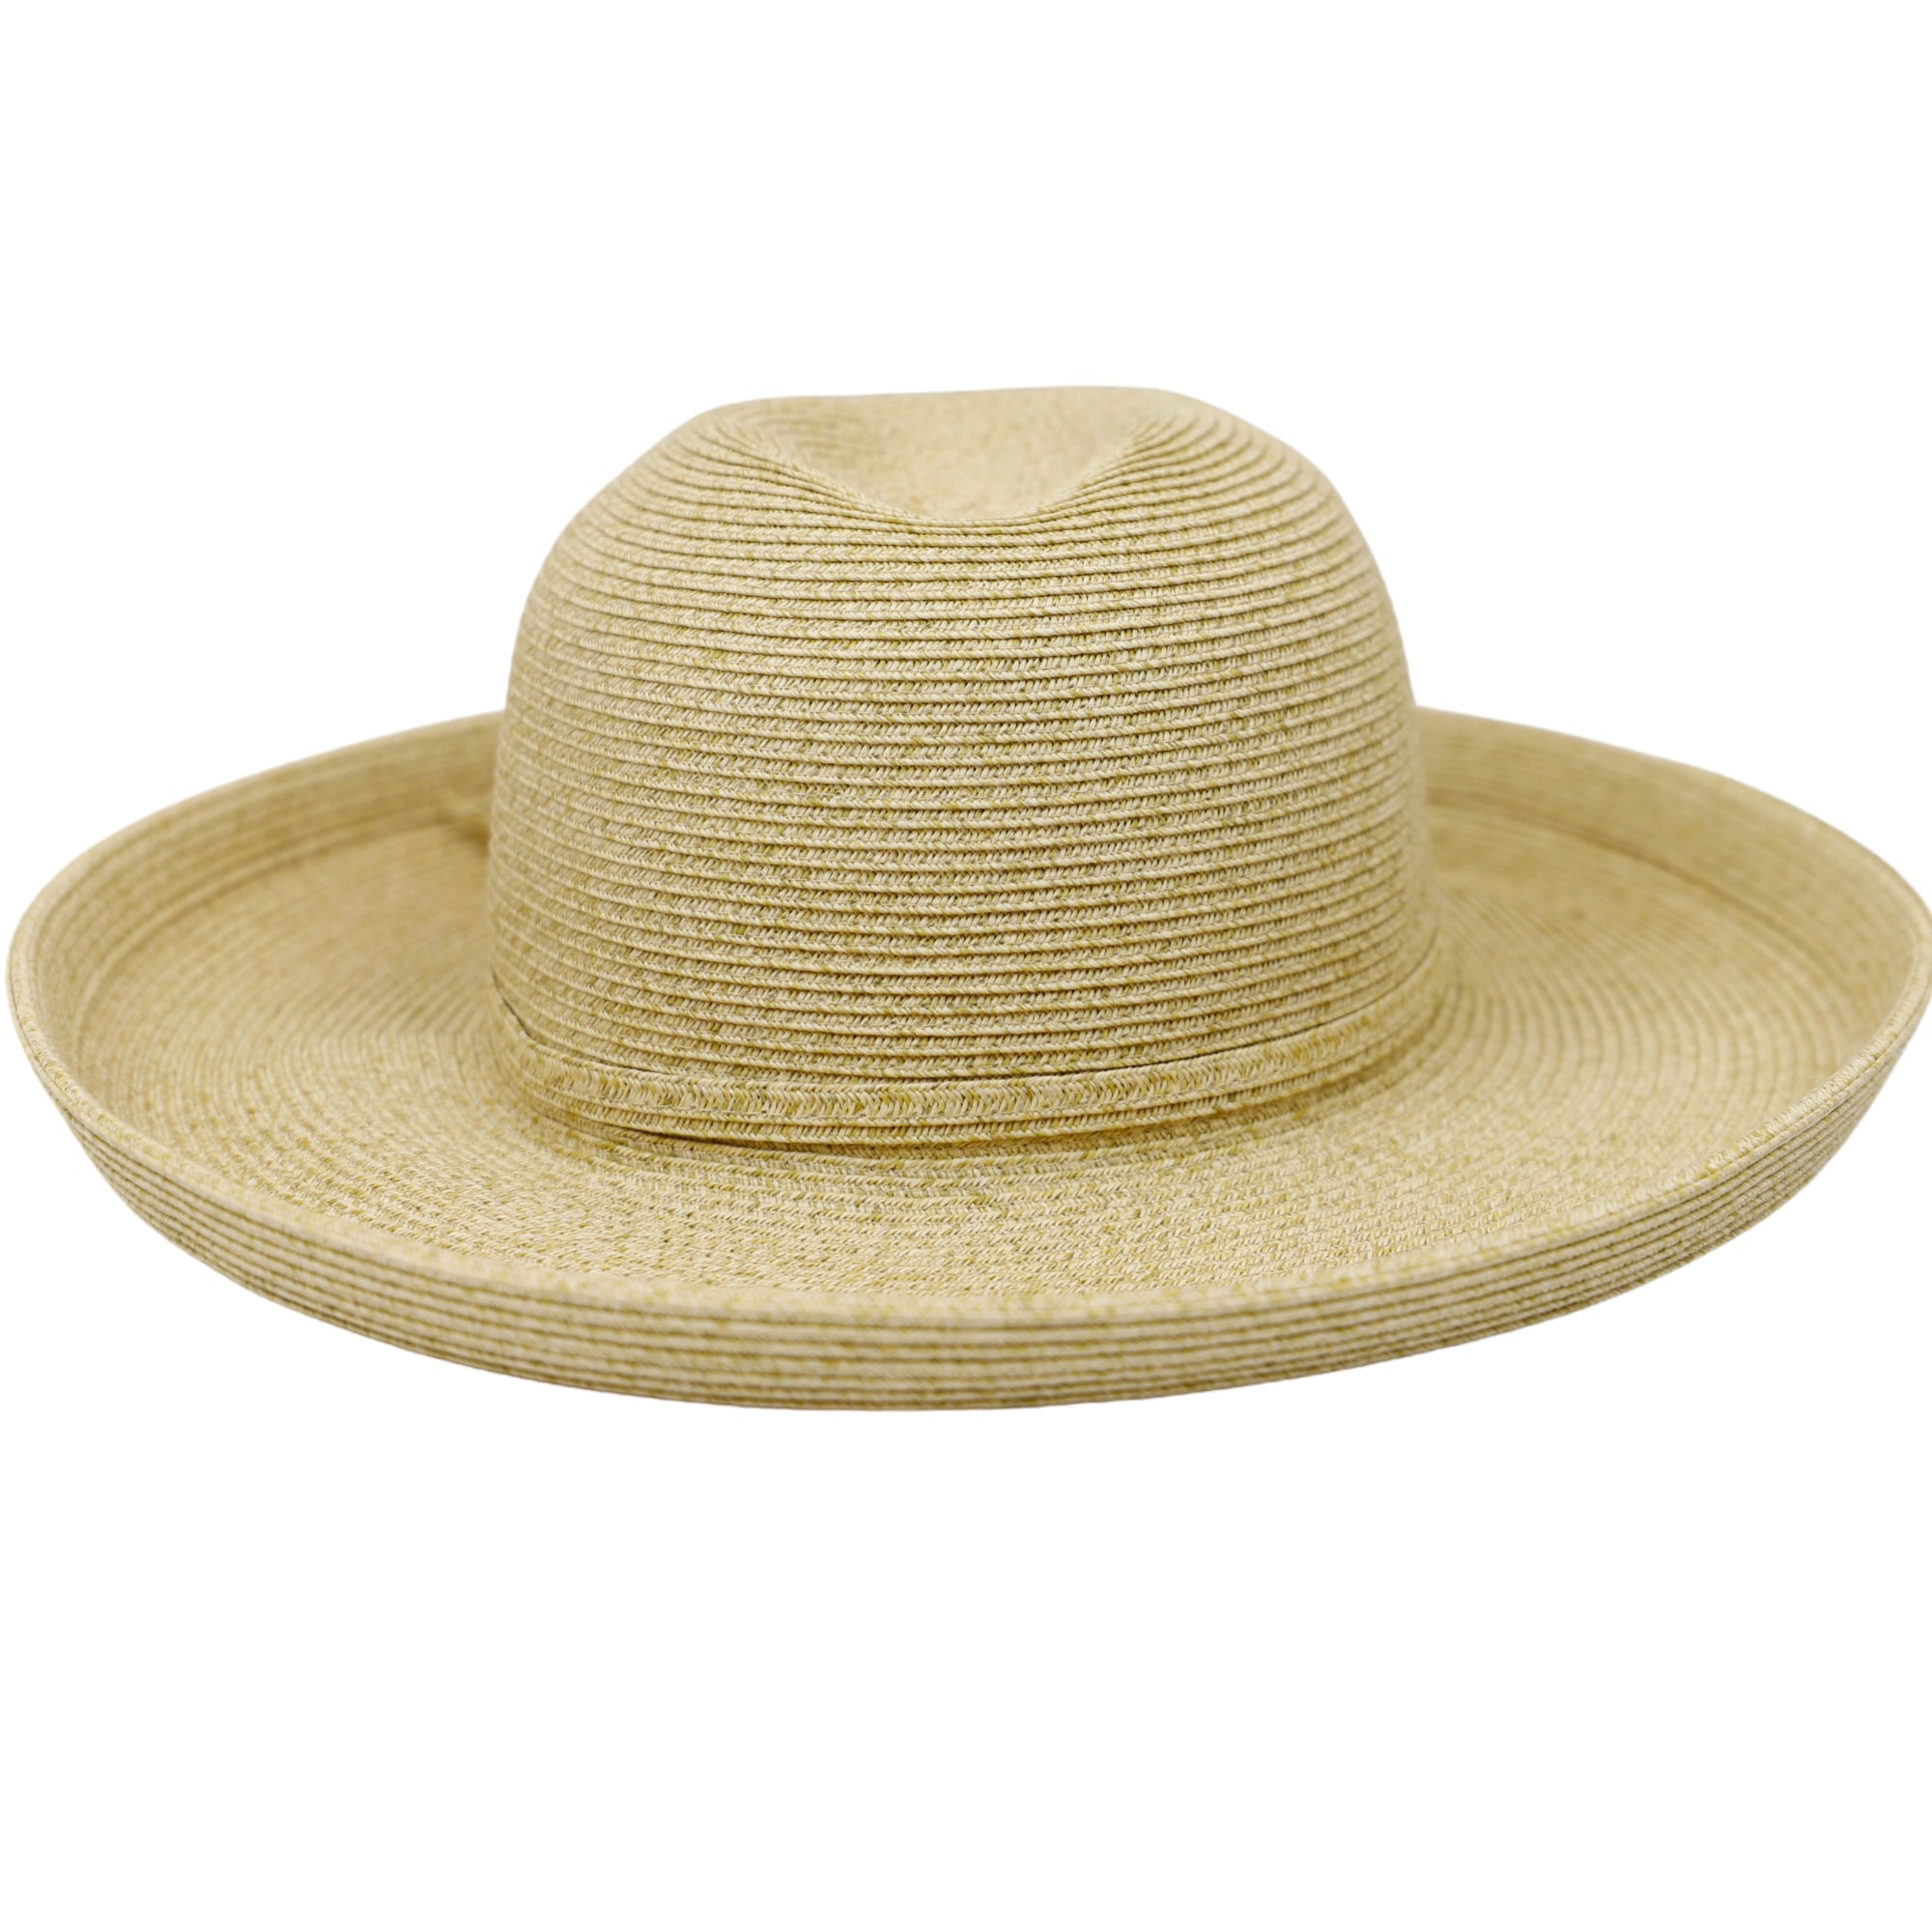 Women's Classic Paperbraided Sun Hat by San Diego Hat Company